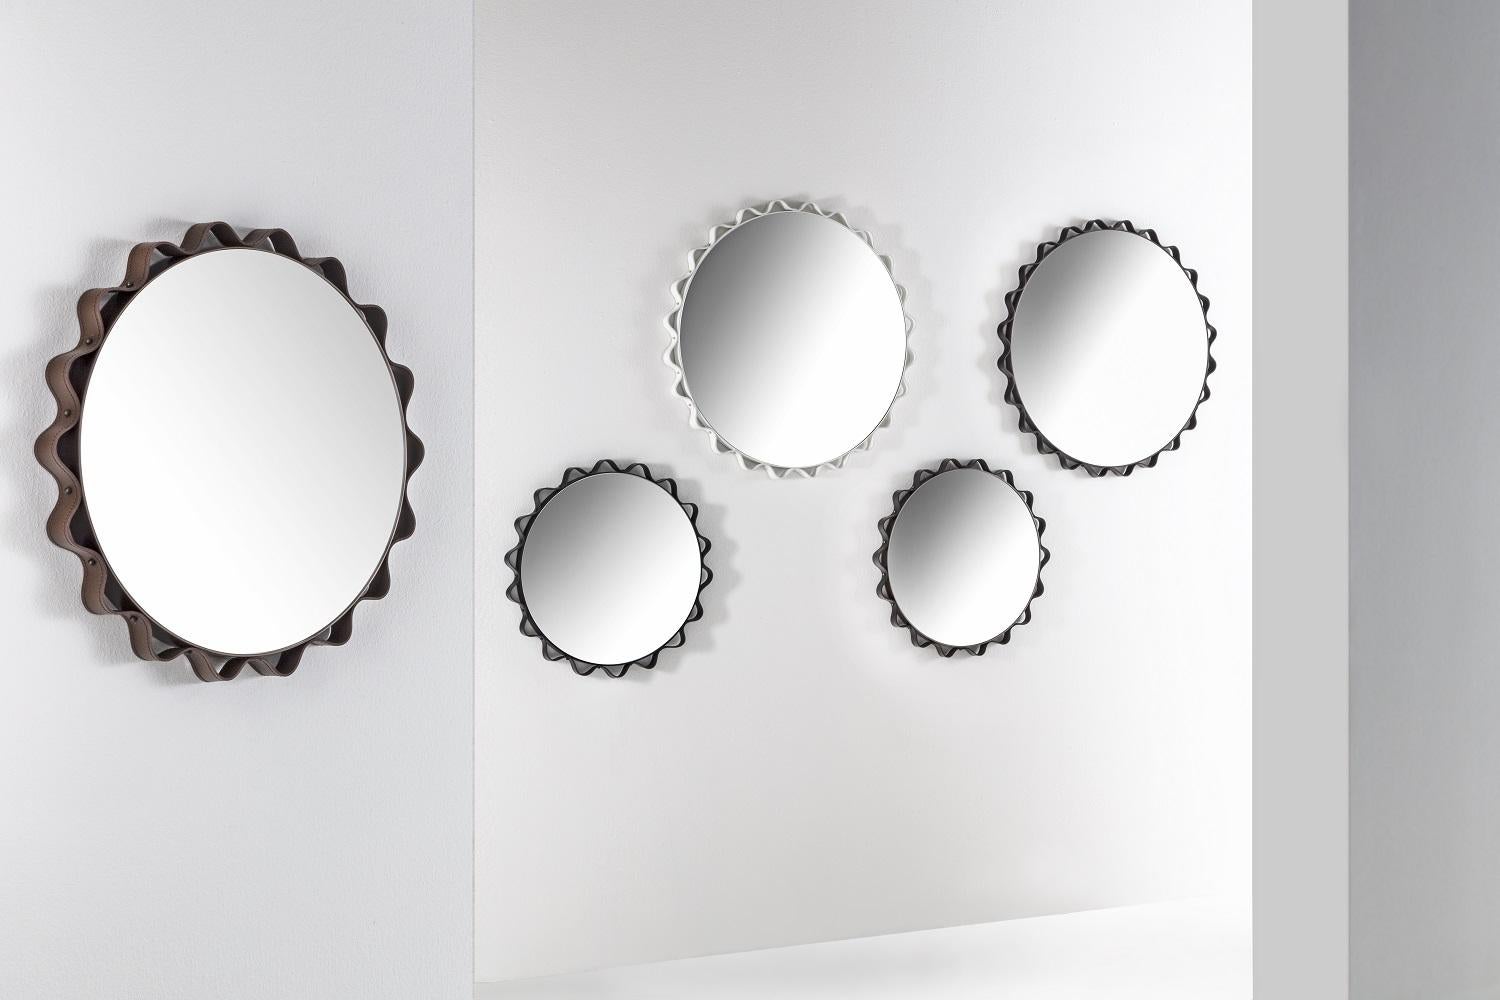 Modern Italian made leather mirror with a round shape available in two different sizes and a leather frame available in four colors. The diameter can be 53 cm or 73 cm and the leather frame can be white, black, moka or anthracite colors. Gold studs